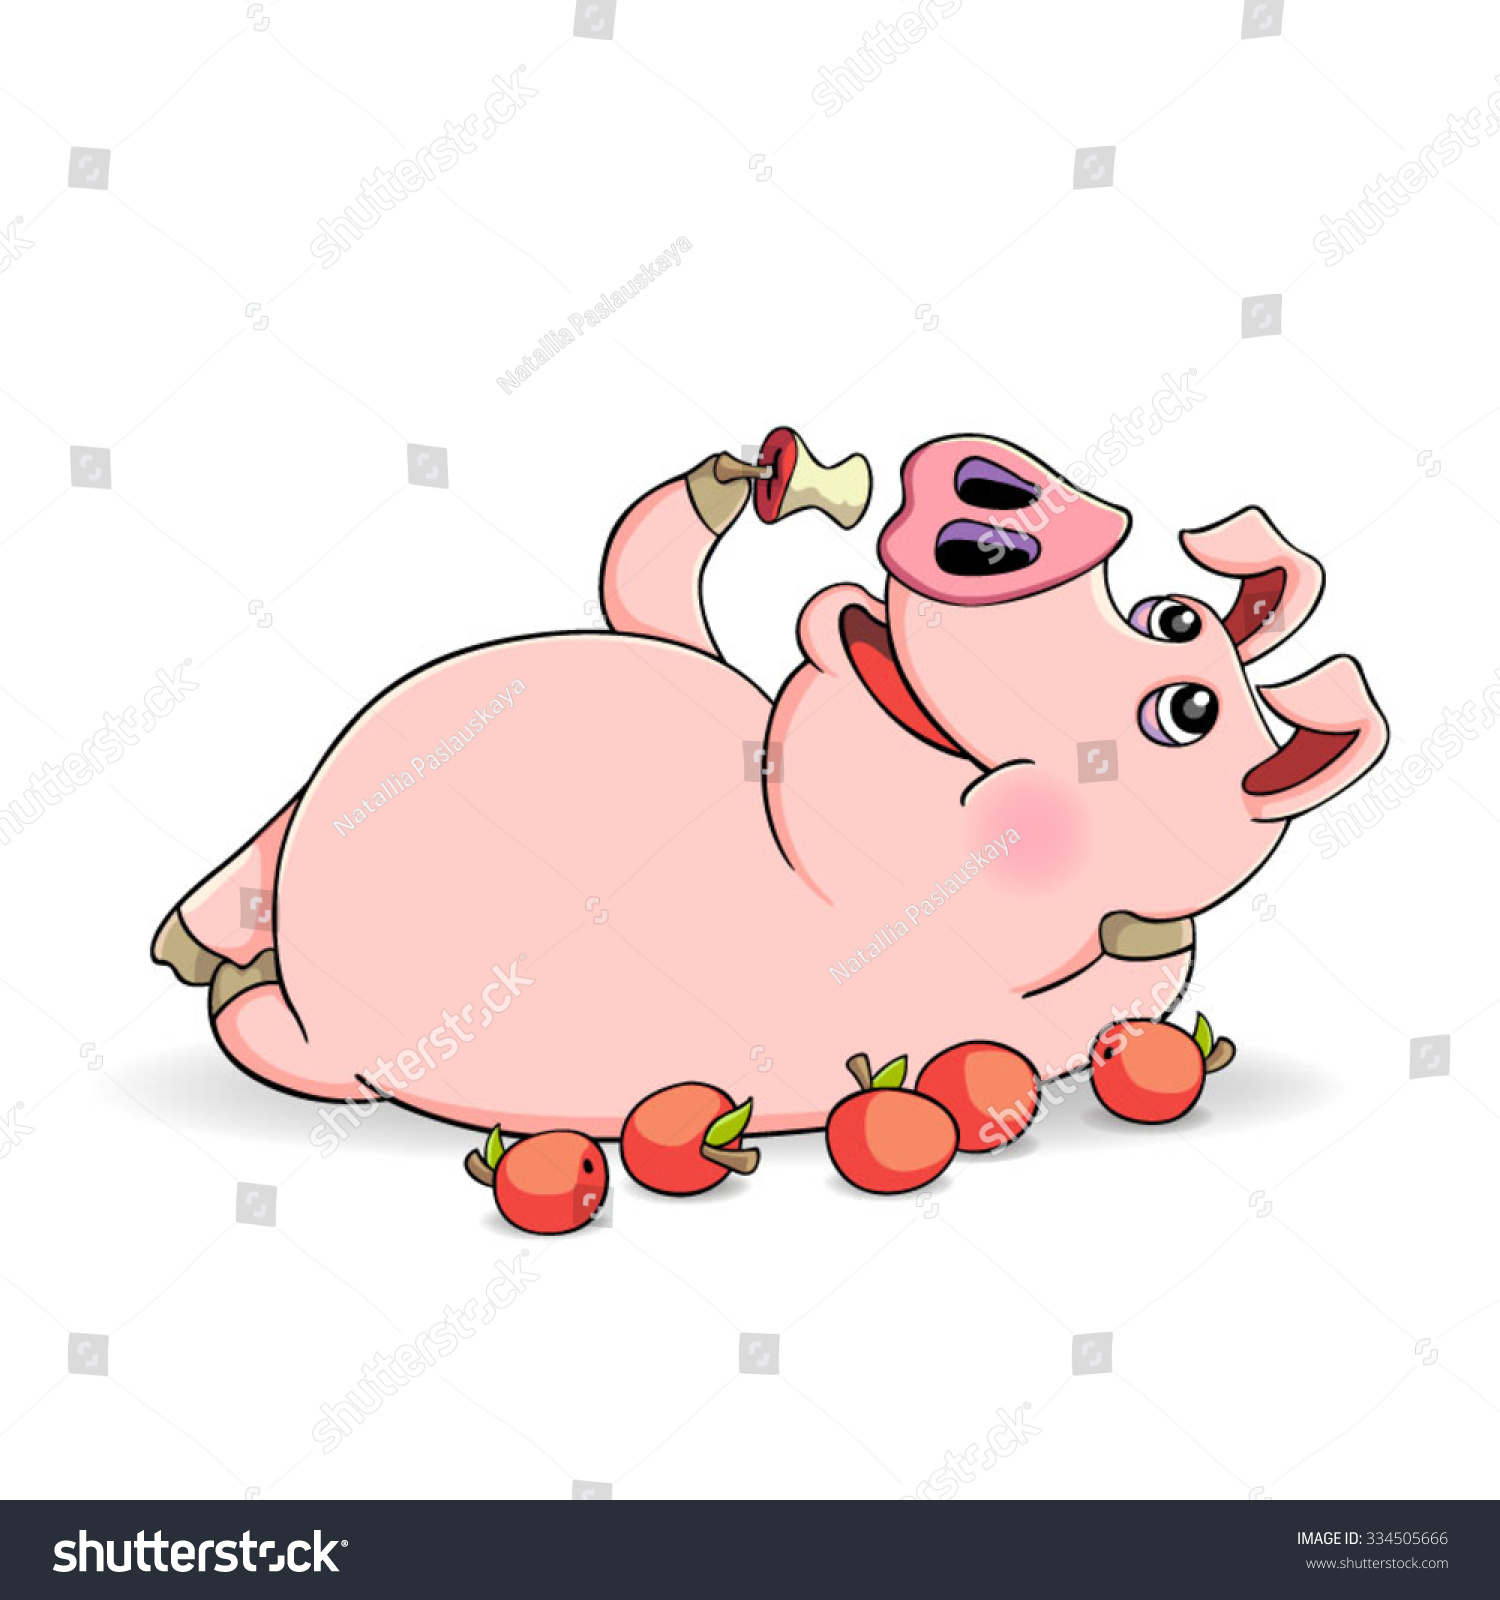 funny pig clipart - photo #24